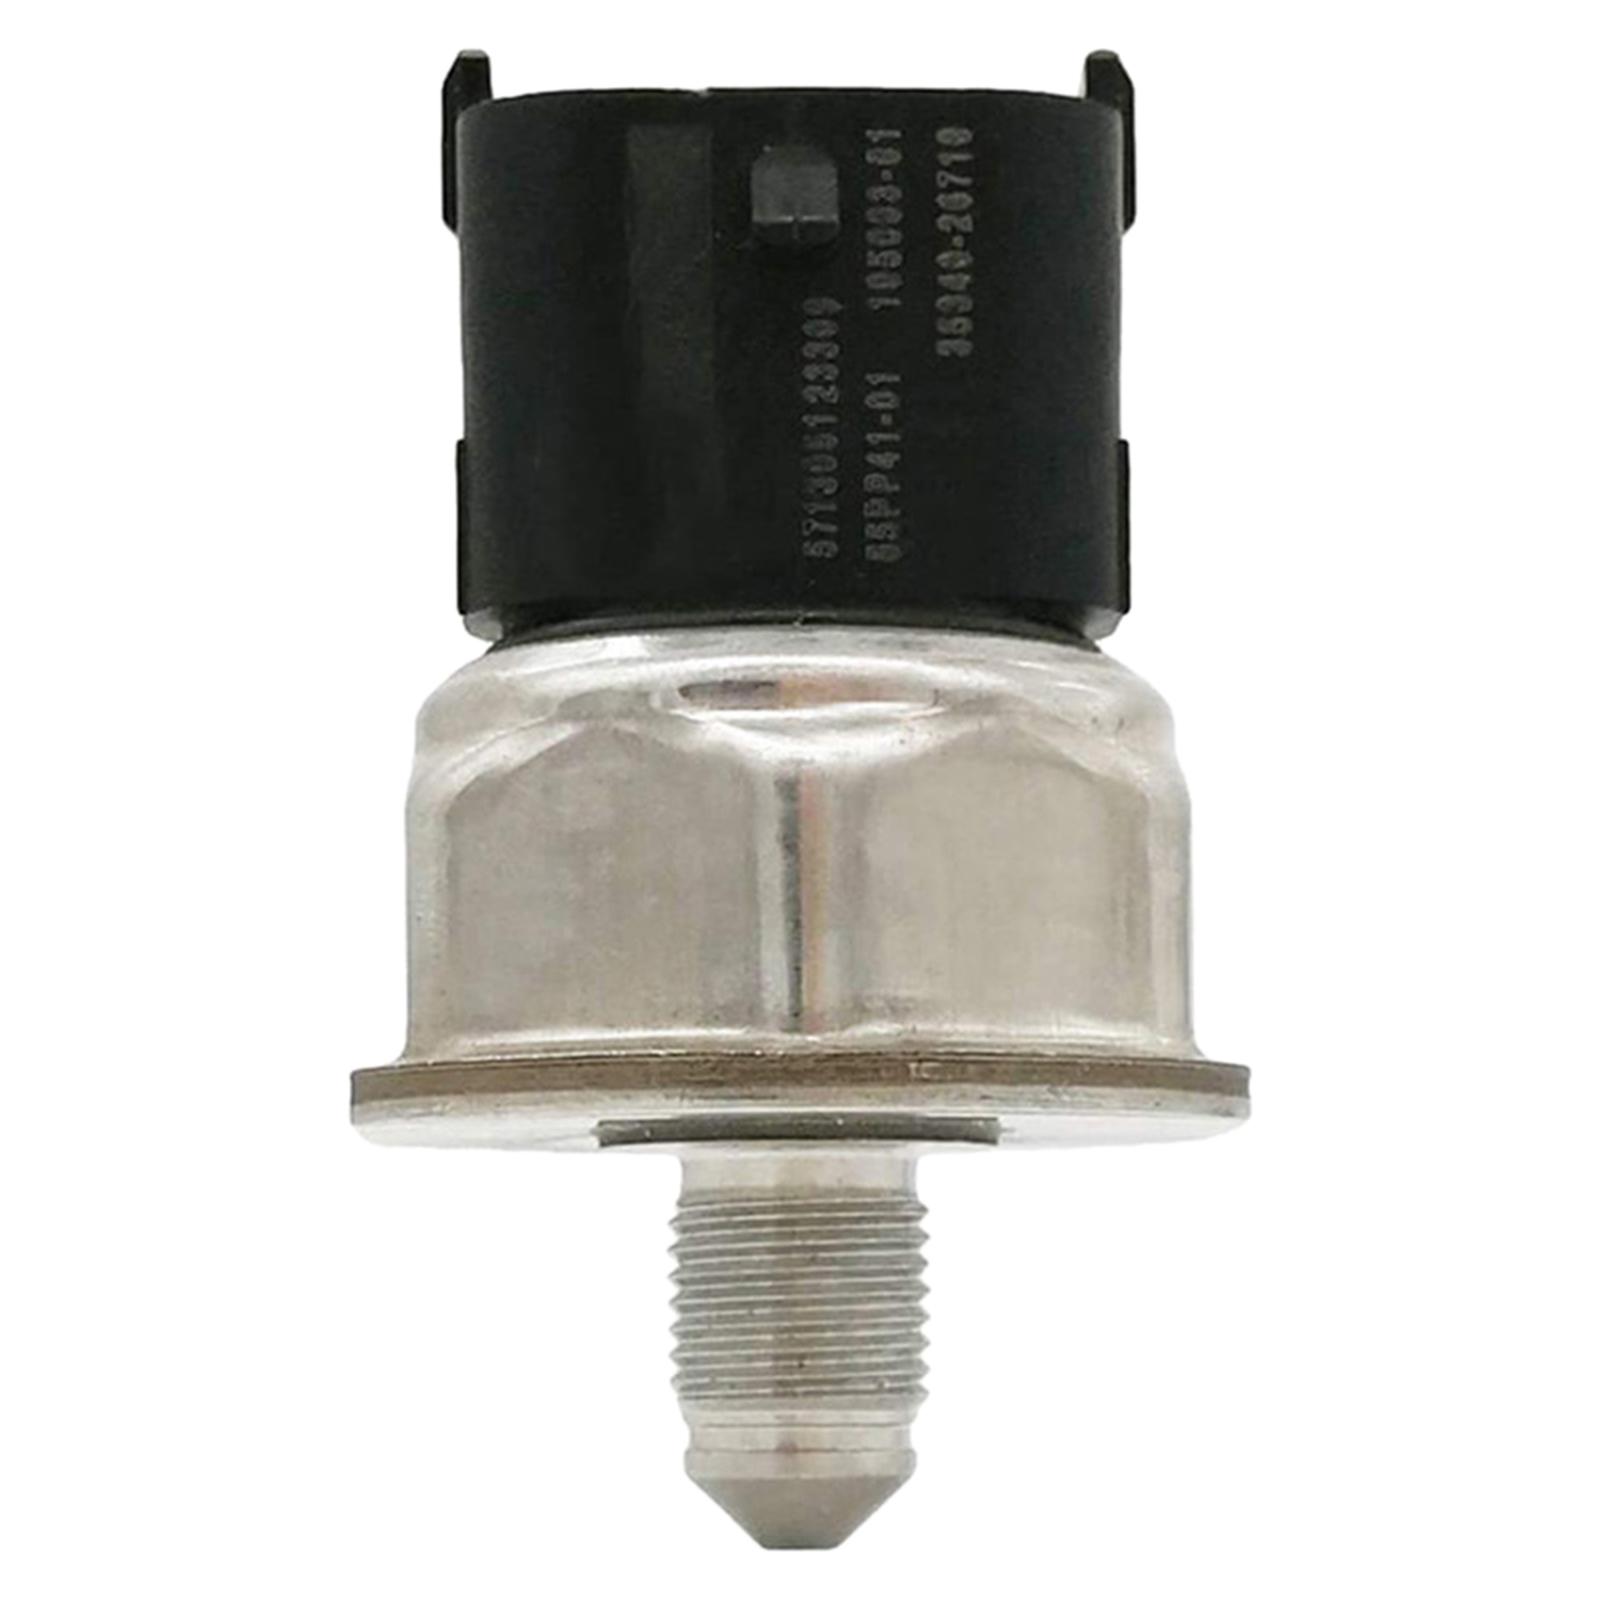 Fuel Pressure Switch Sensor 55PP41-01 35340-2G710 Replacement Accs